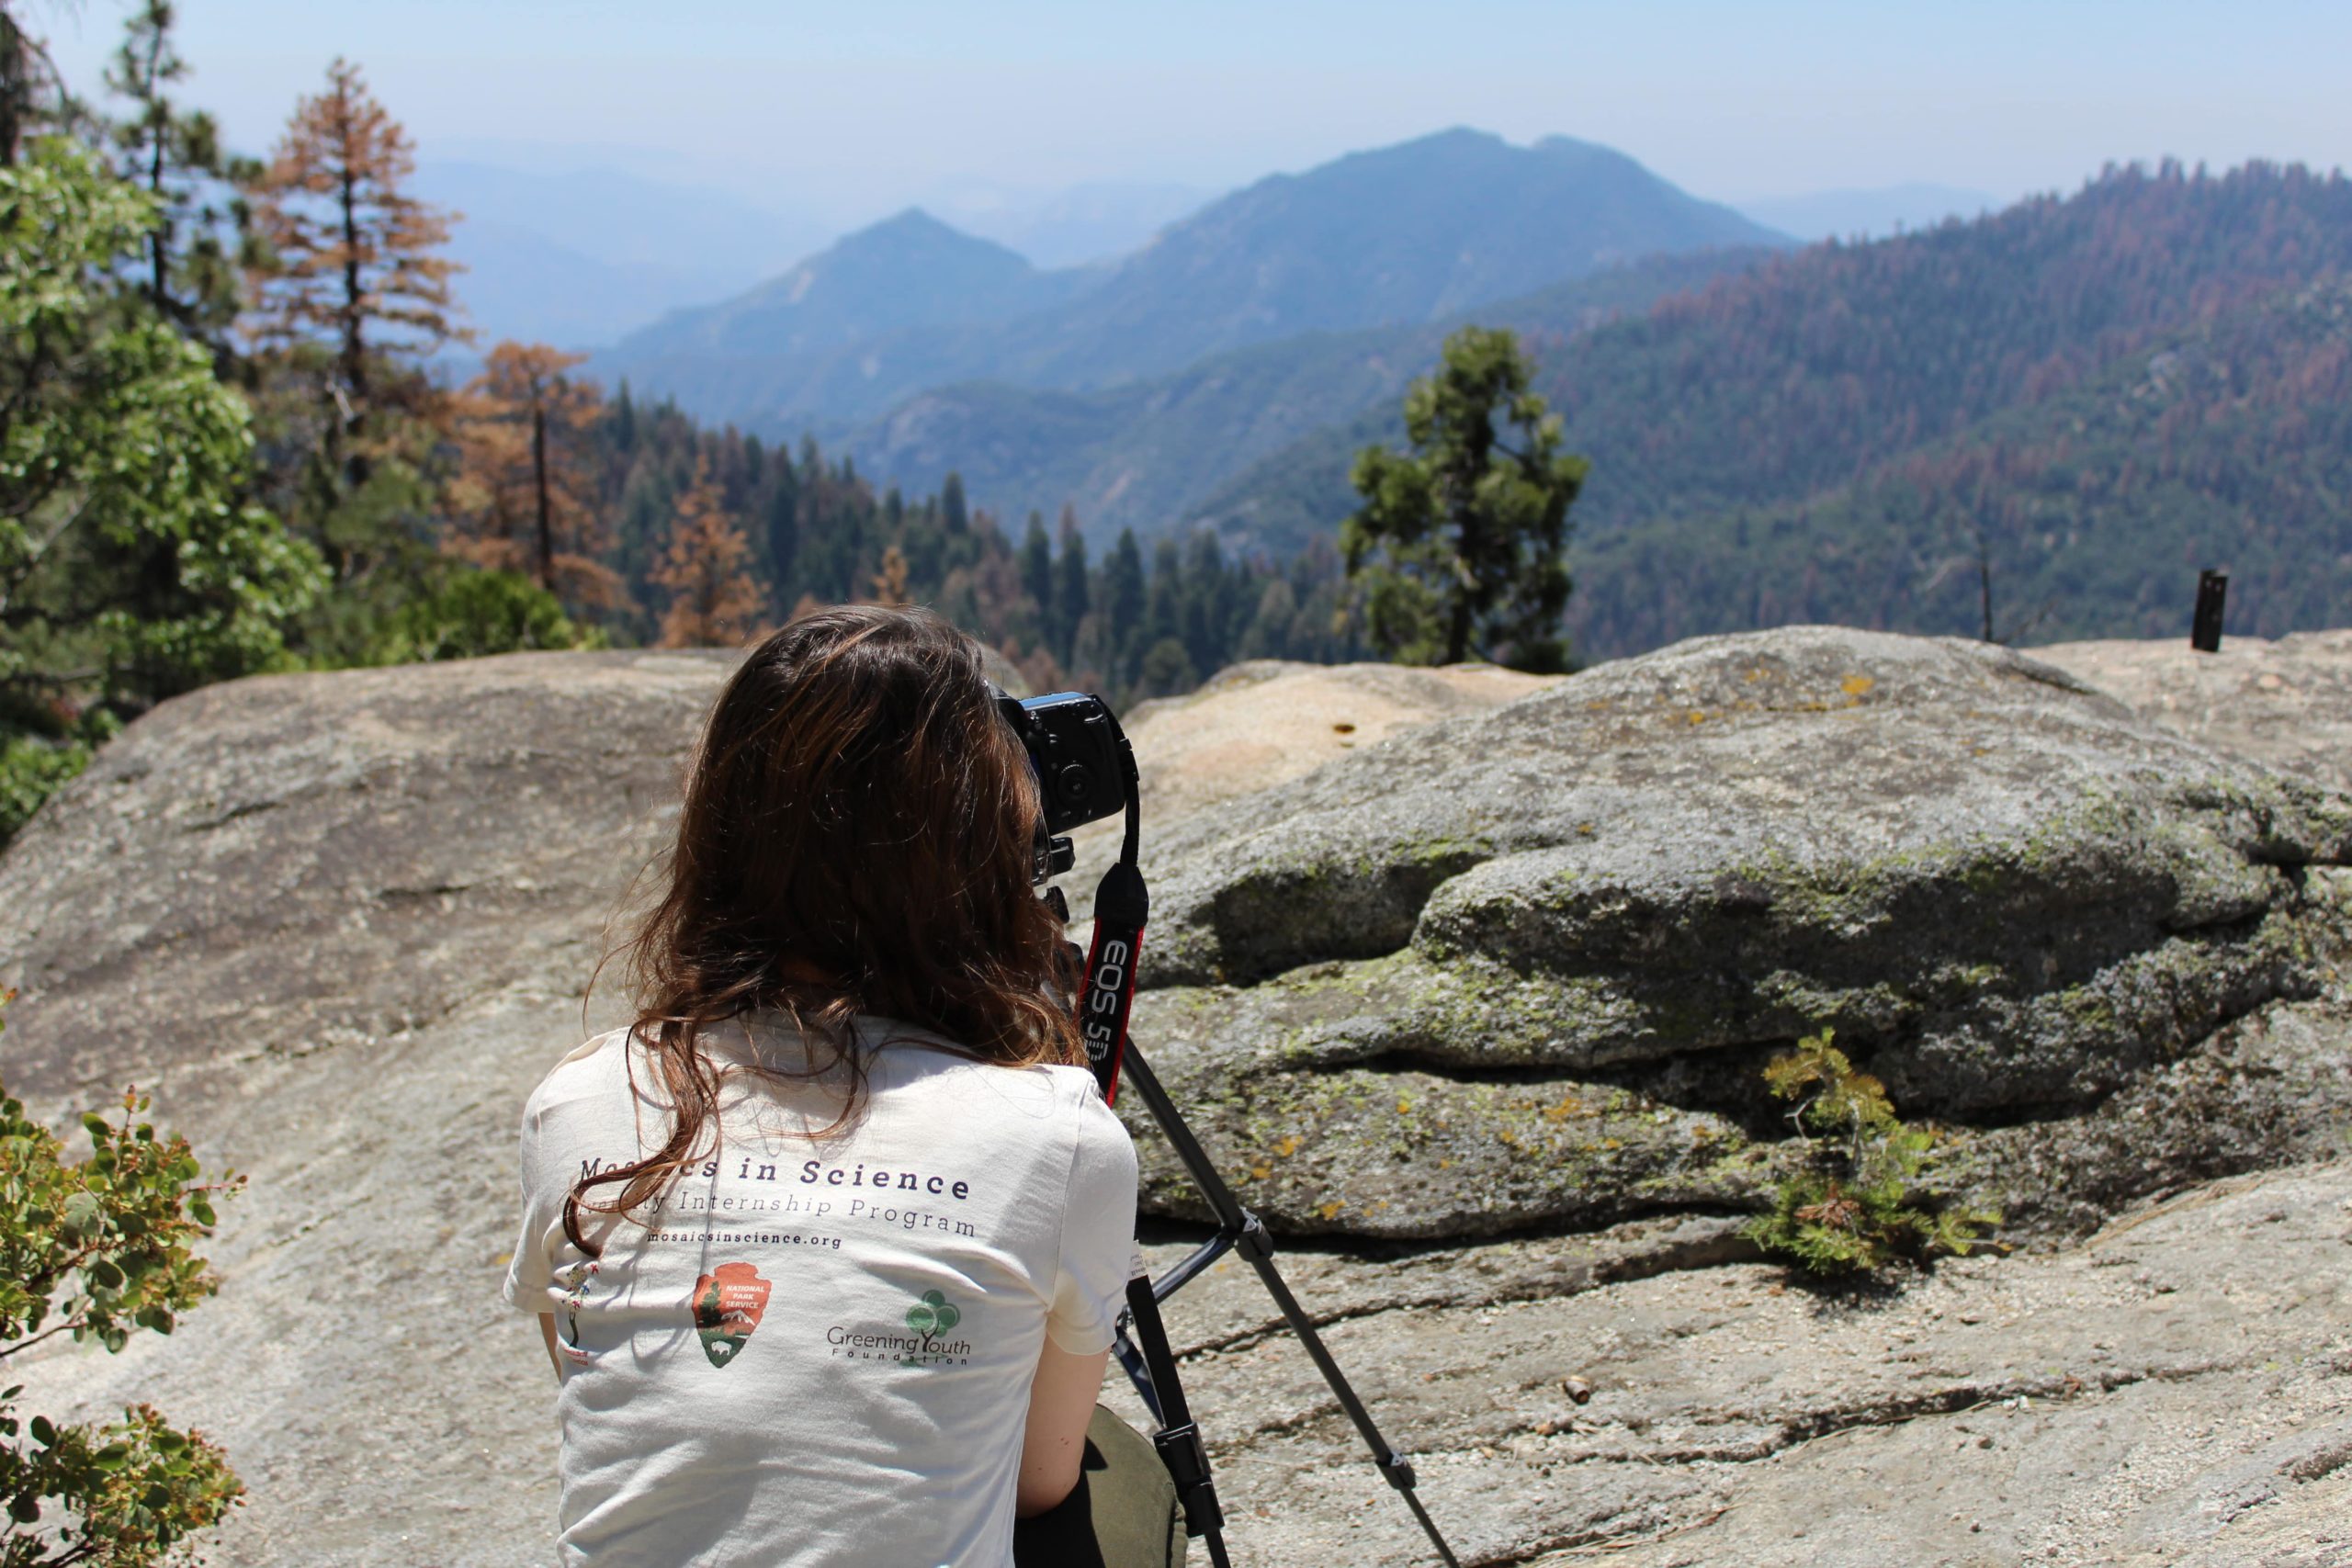 A GYF intern looks through a camera set up on a tripod. She's sitting on a rocky outcropping, gazing at mountains before her.